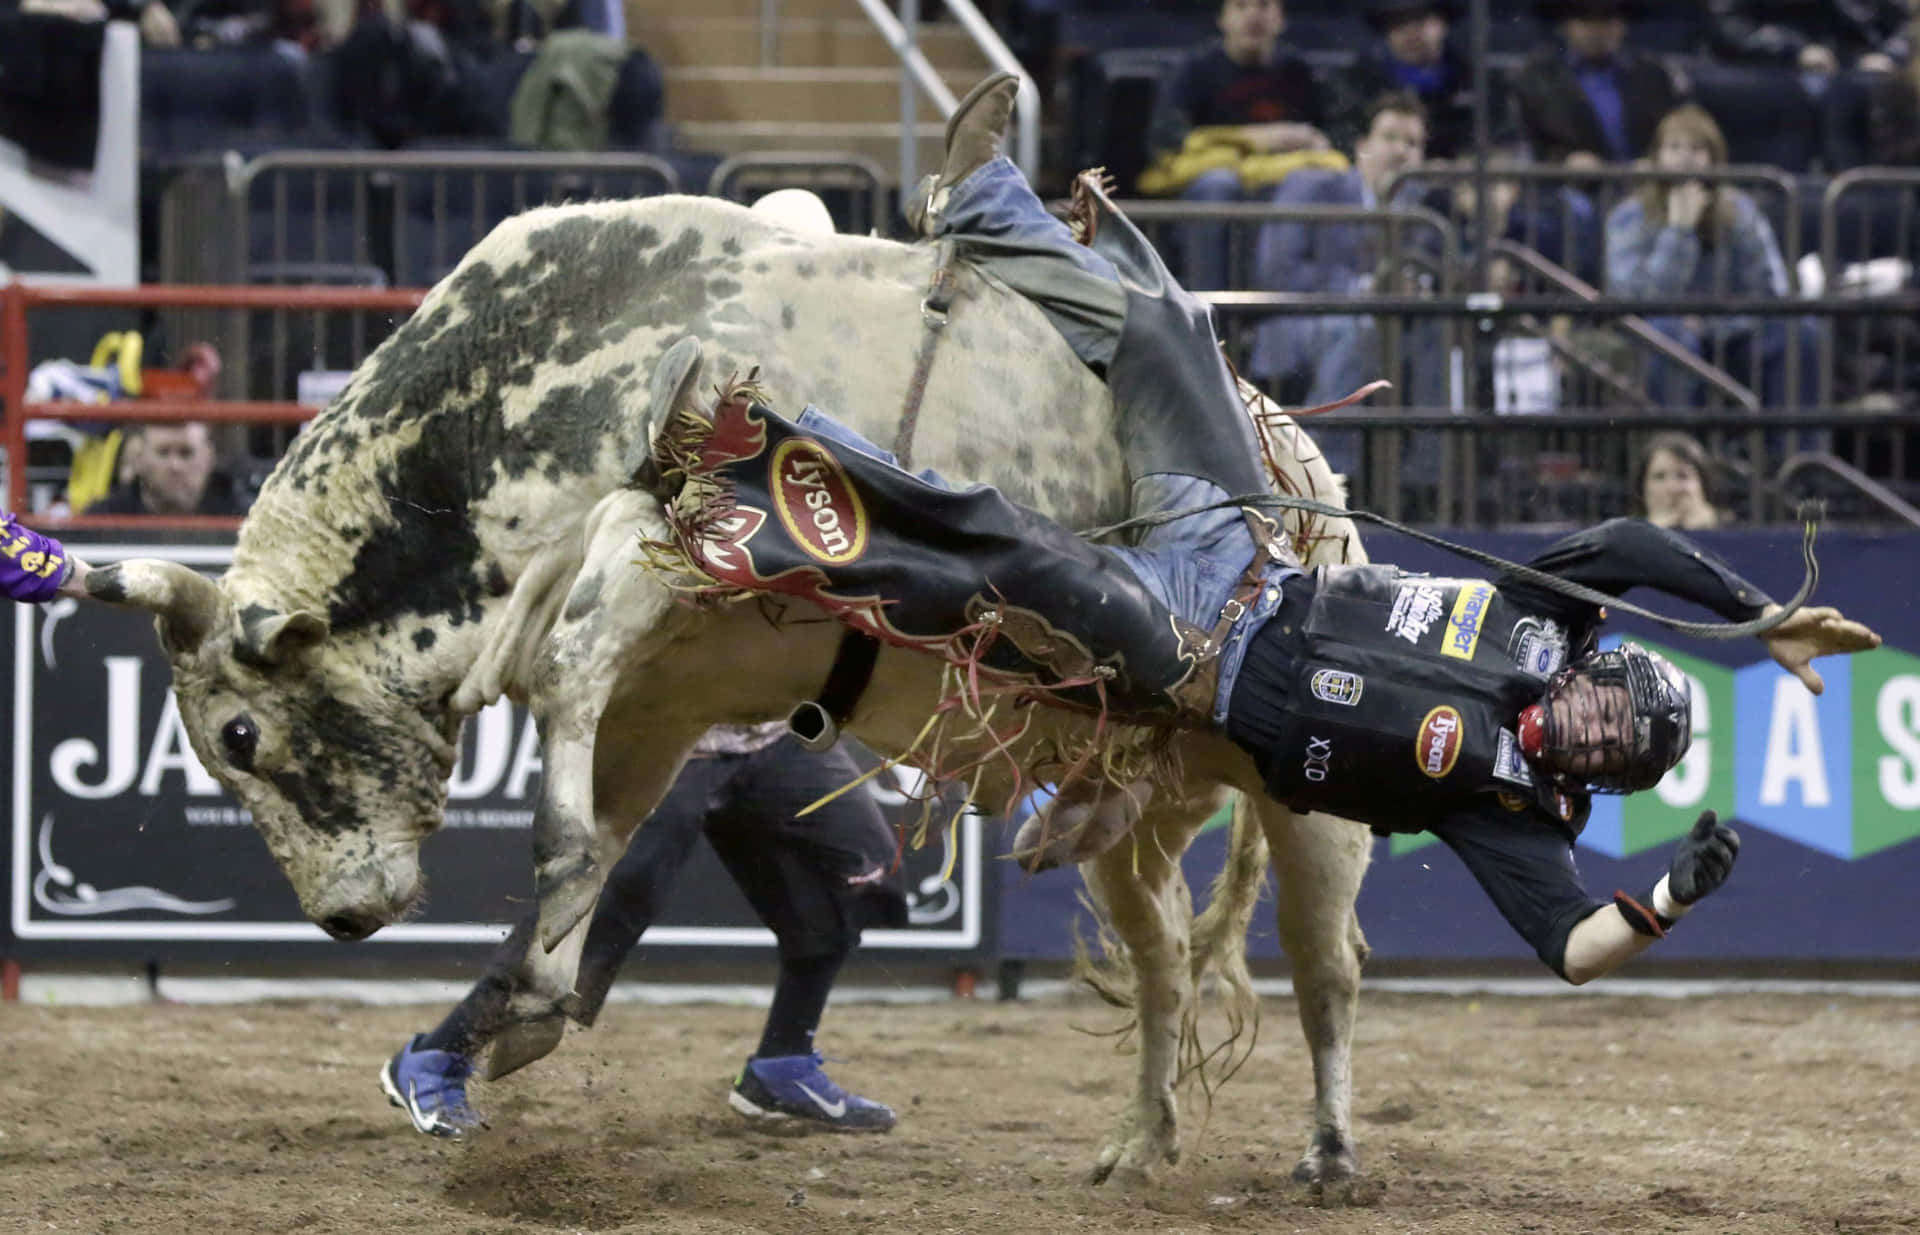 A Man Is Bucking A Bull In A Rodeo